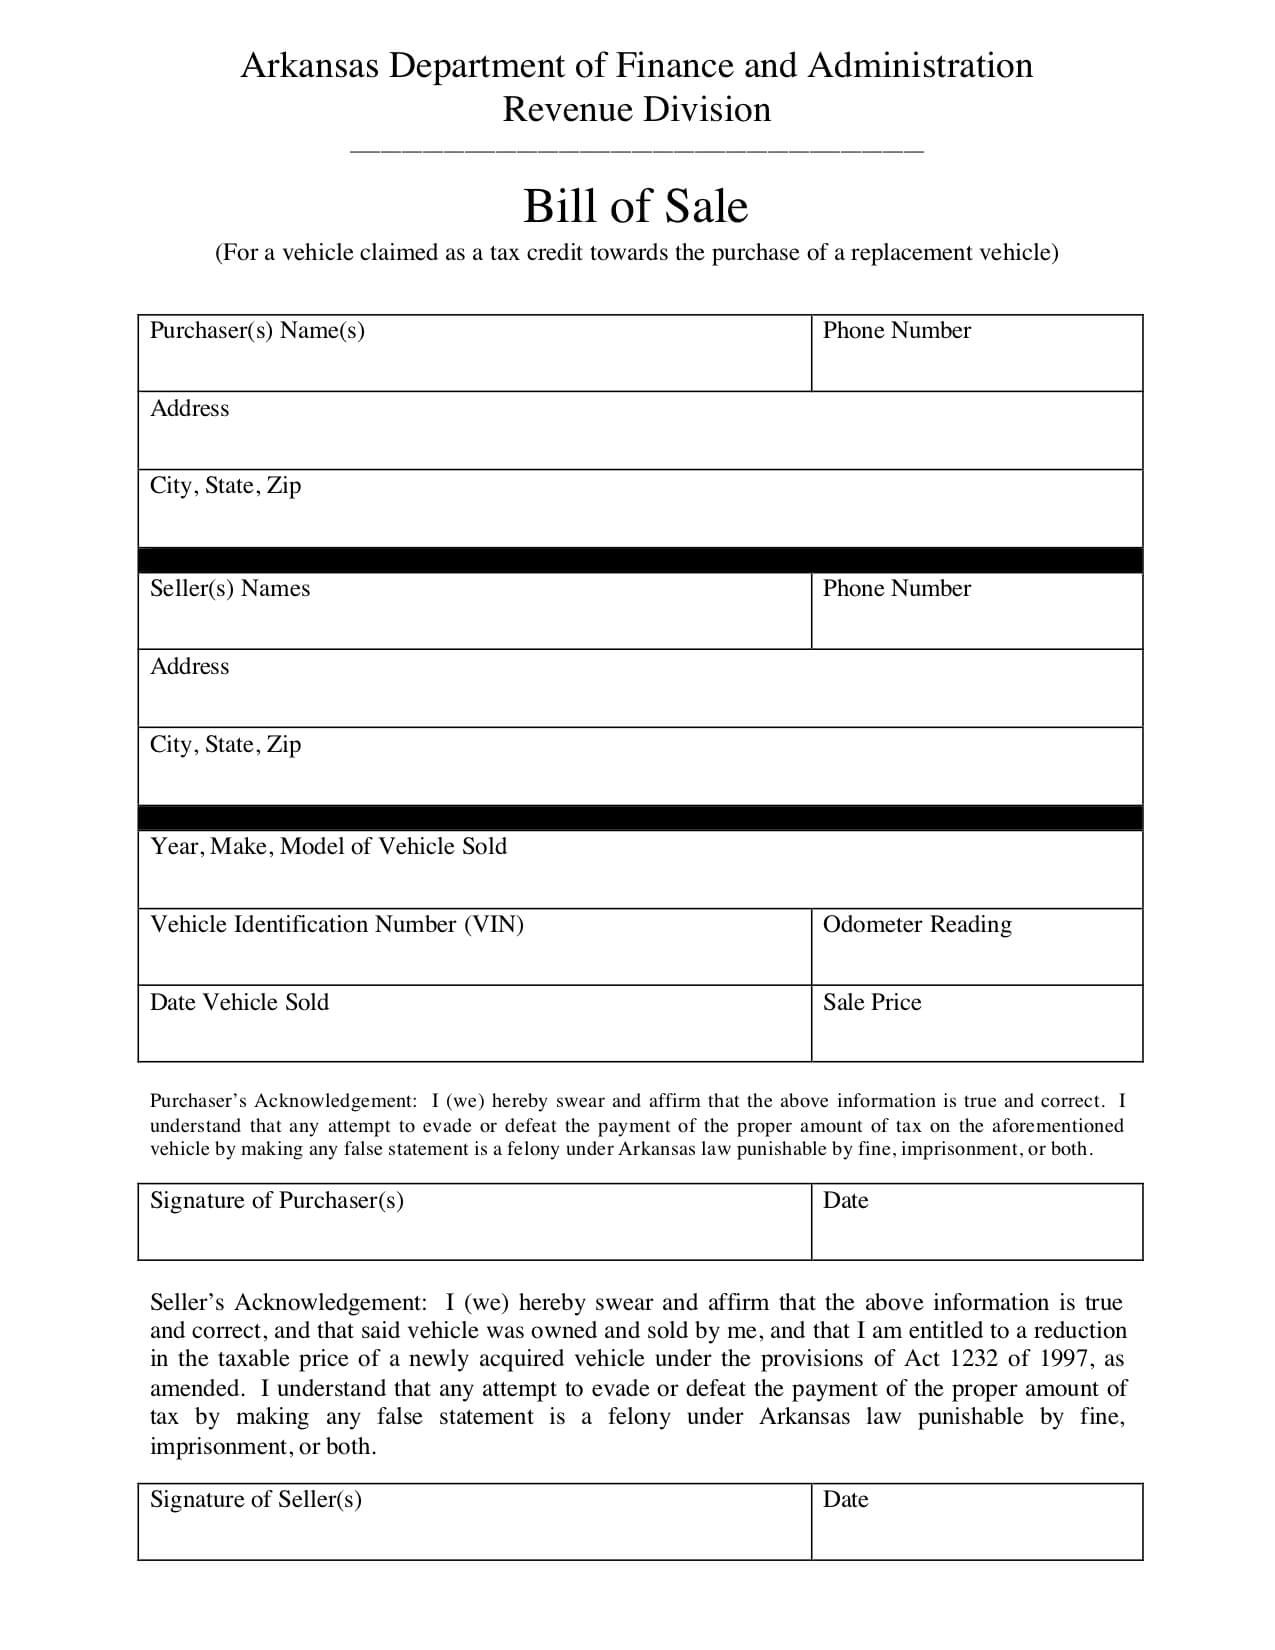 Free Arkansas Bill Of Sale Form – Pdf Template | Legaltemplates Within Certificate Of Origin For A Vehicle Template